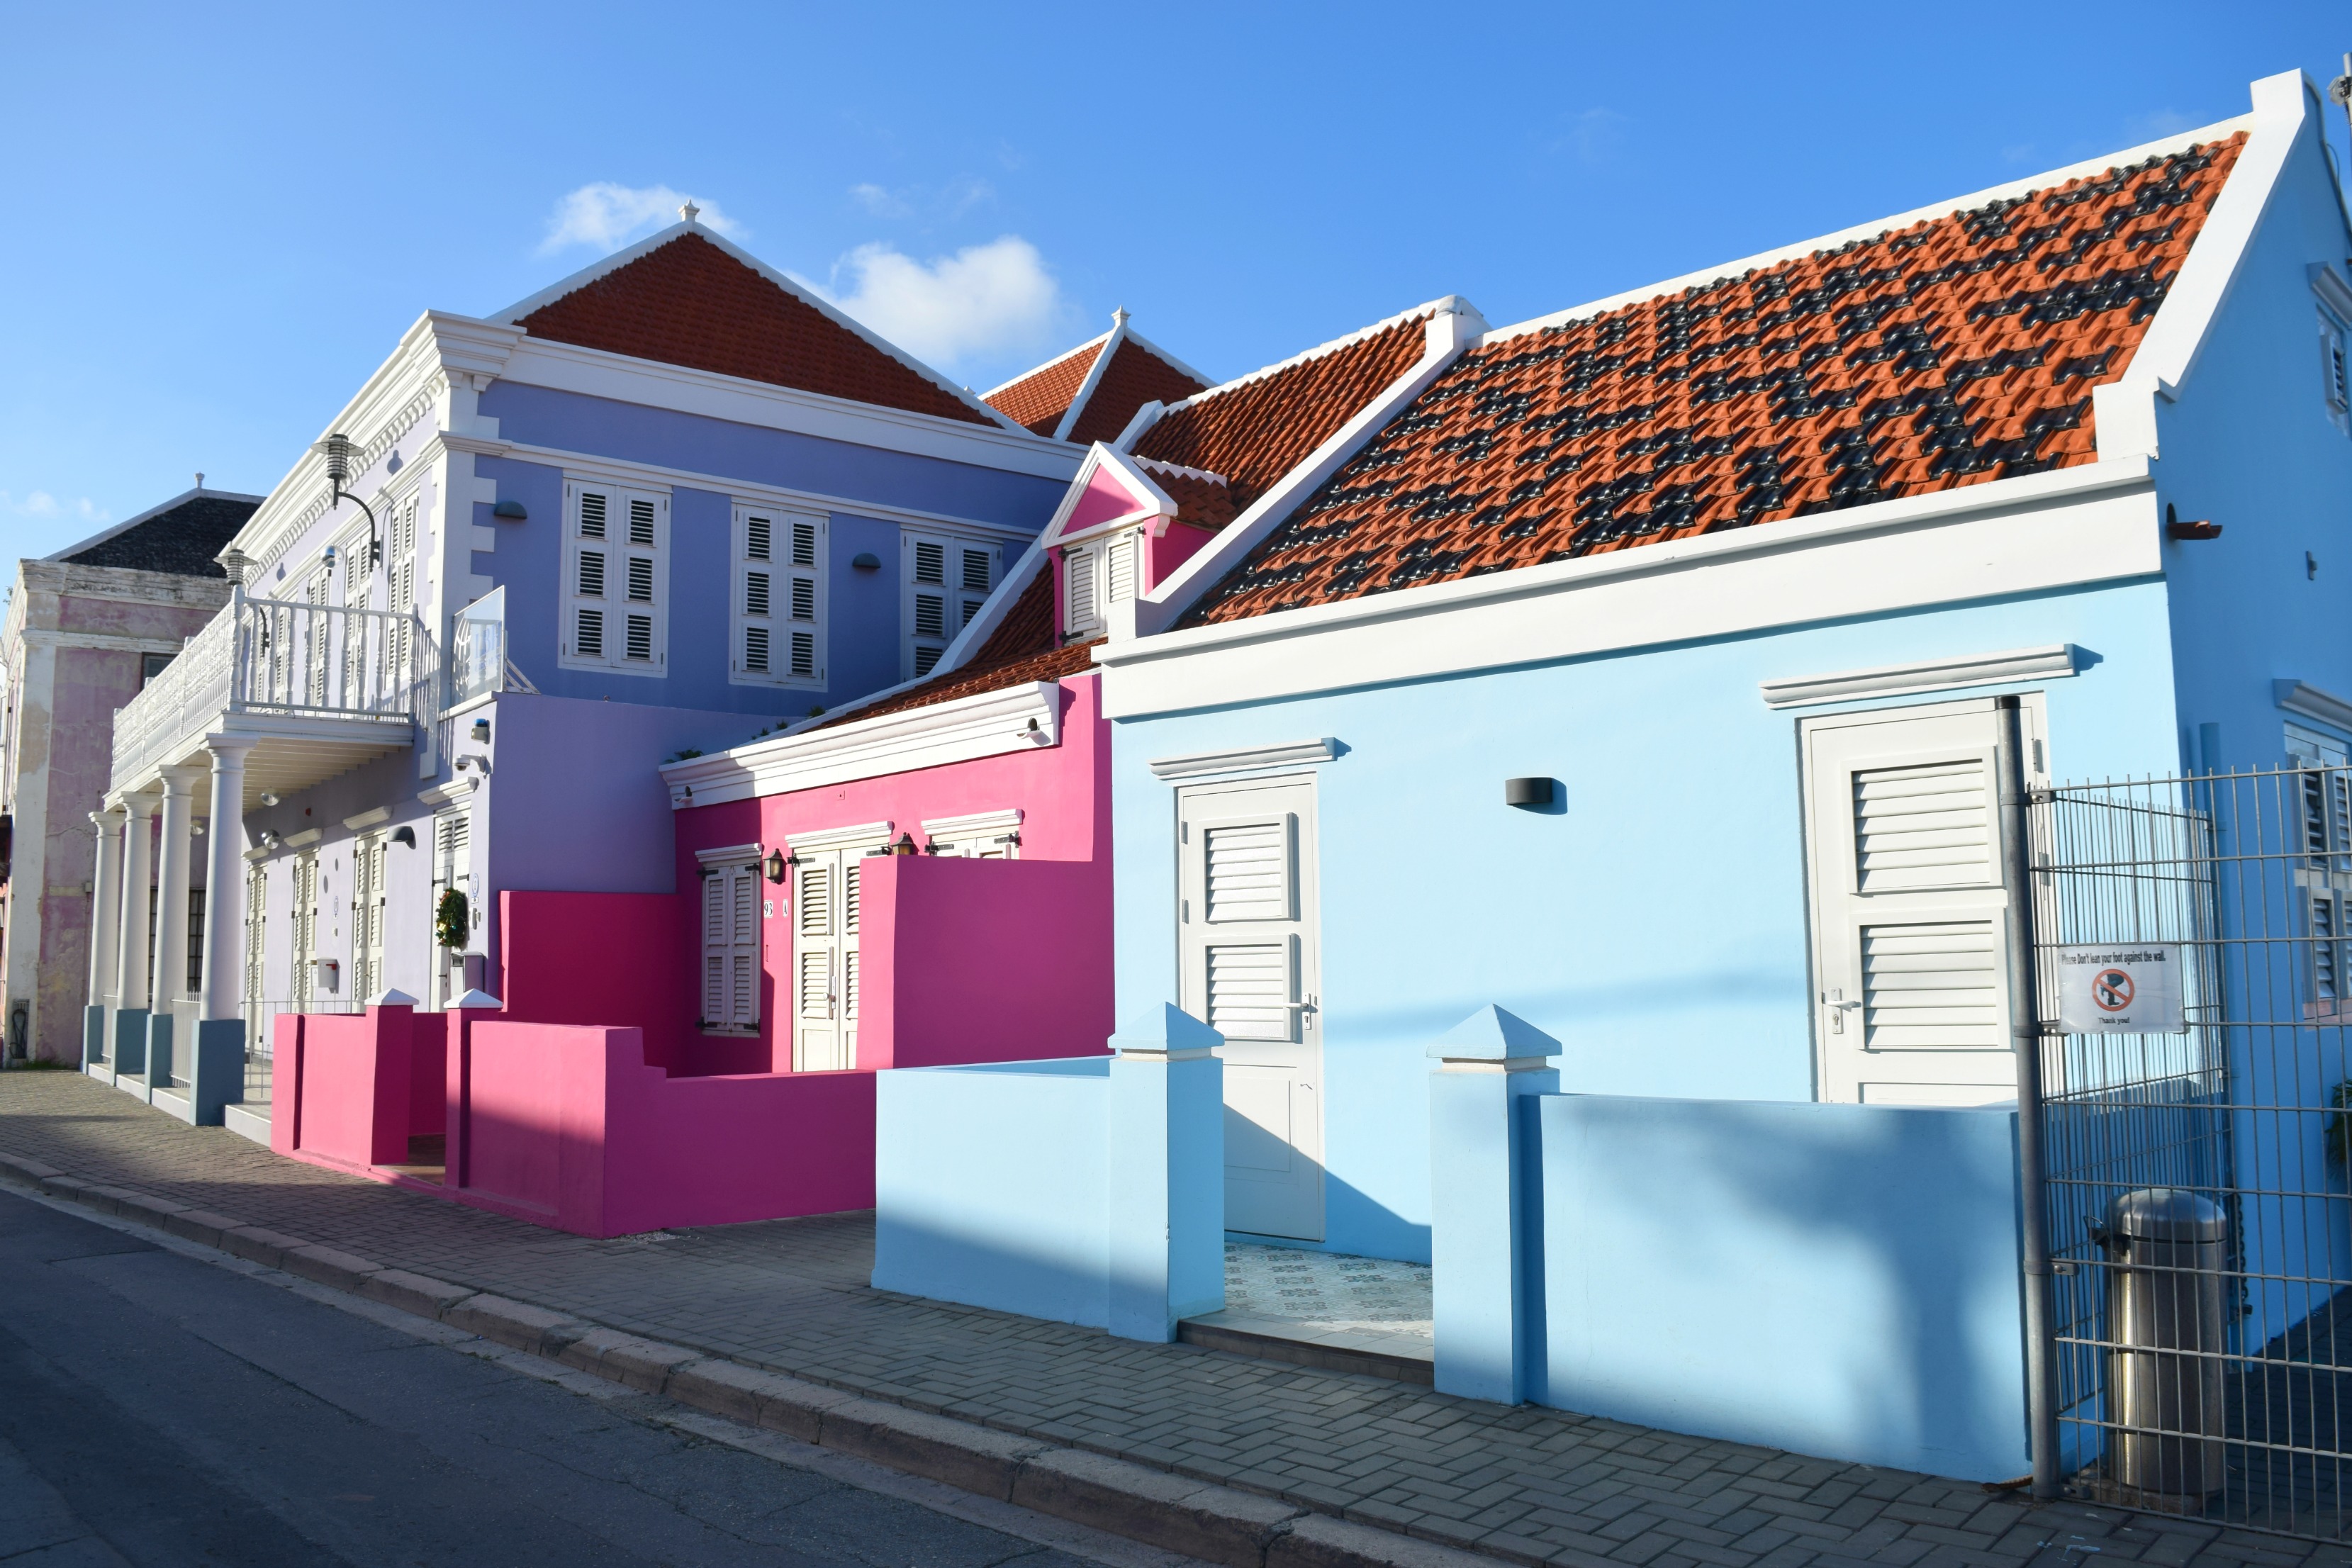 vibrant-colors-willemstad-curacao-37